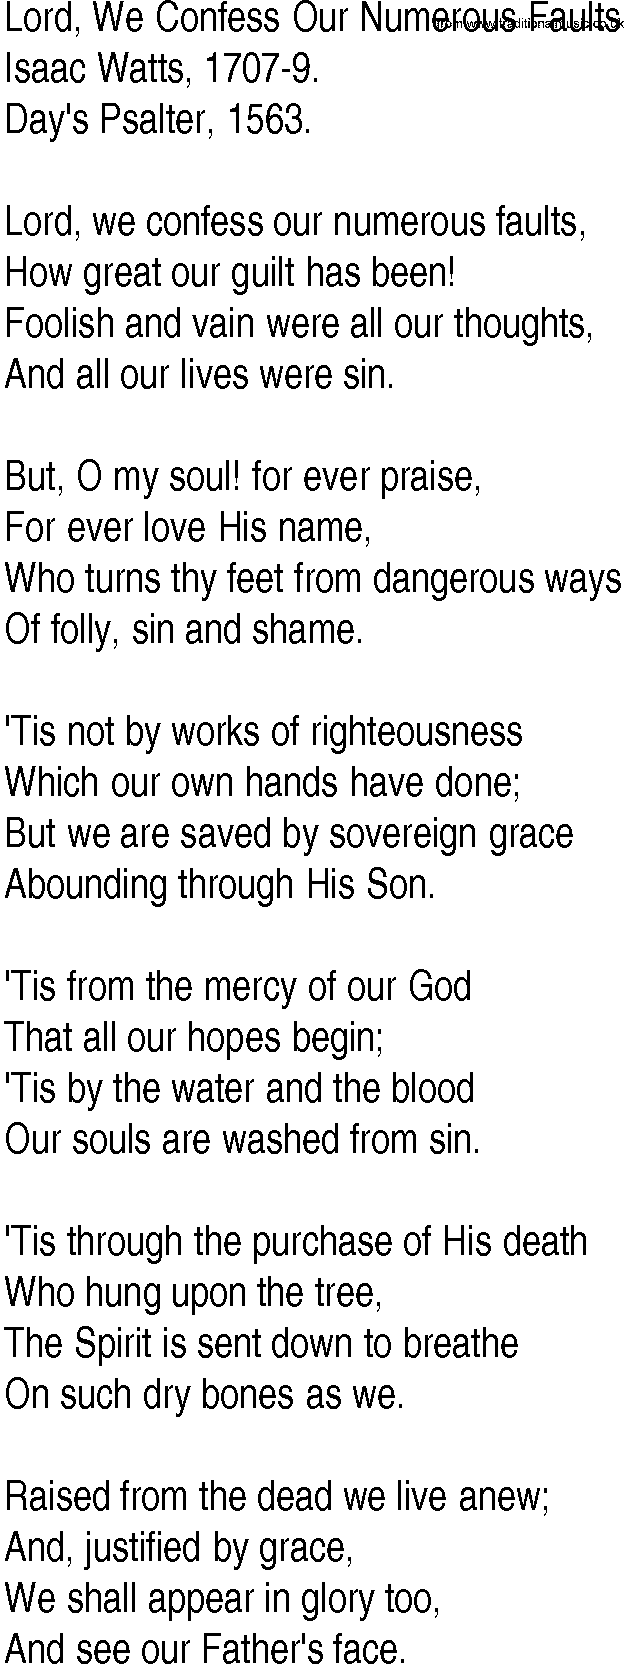 Hymn and Gospel Song: Lord, We Confess Our Numerous Faults by Isaac Watts lyrics